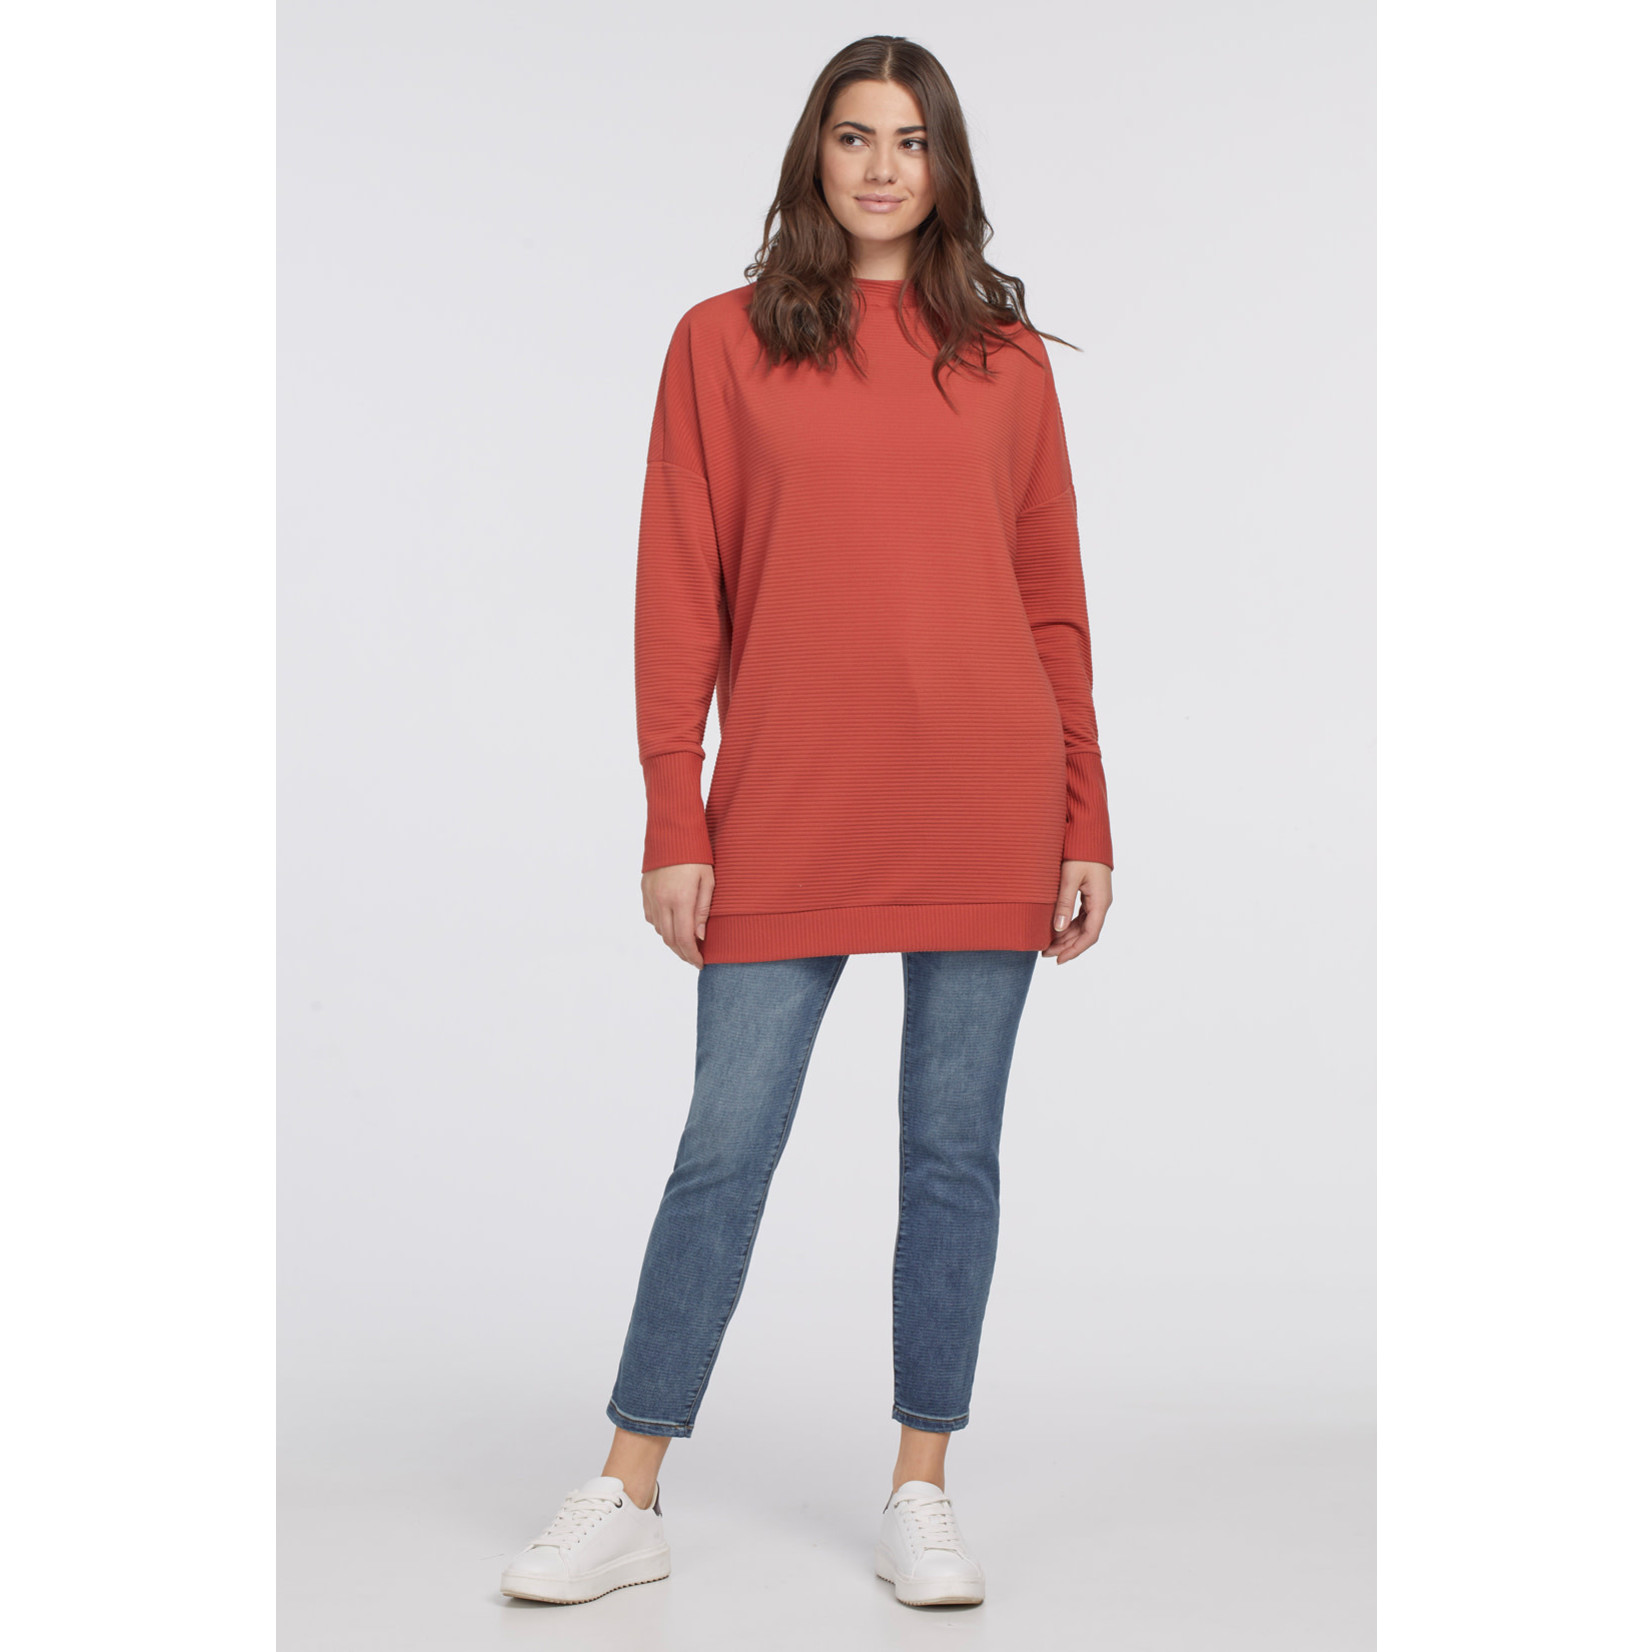 Tribal Funnel Neck Tunic (More Colors)